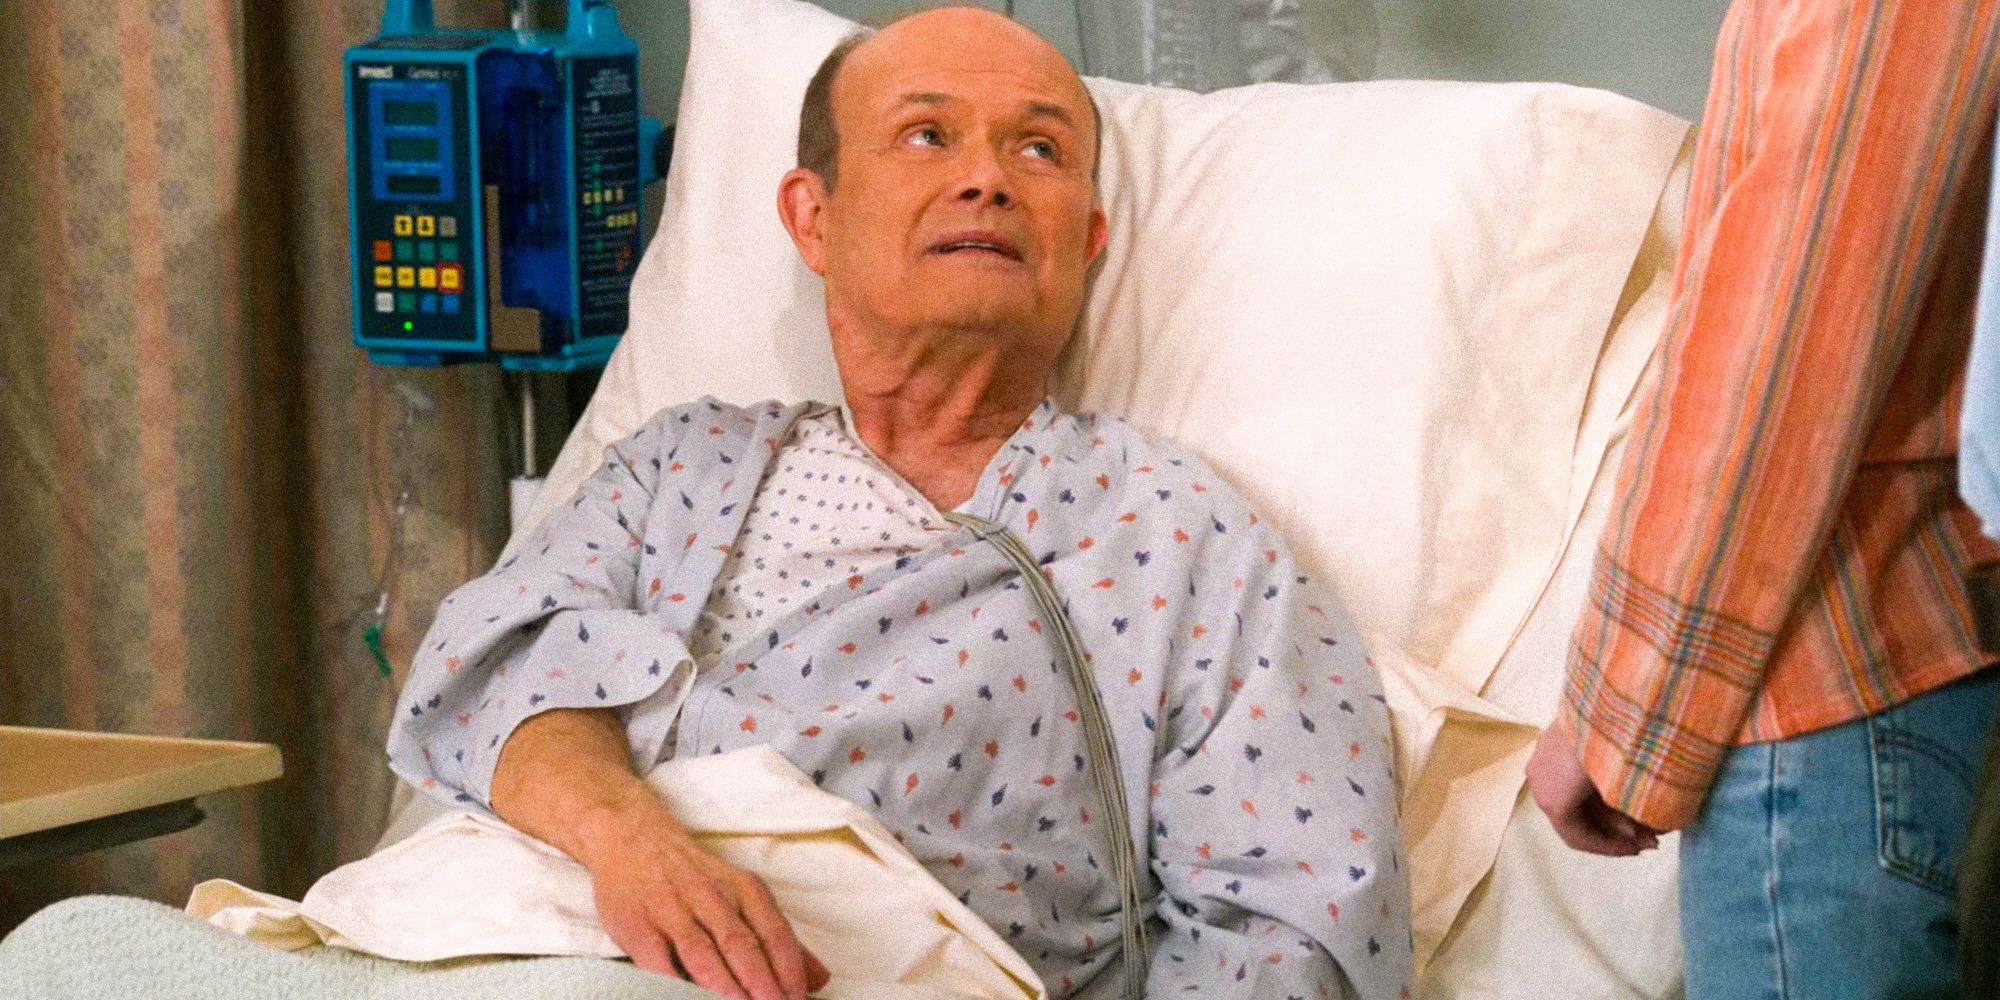 Red (Kurtwood Smith) in the hospital talking to Leia in That 90s show part 2 Episode 7